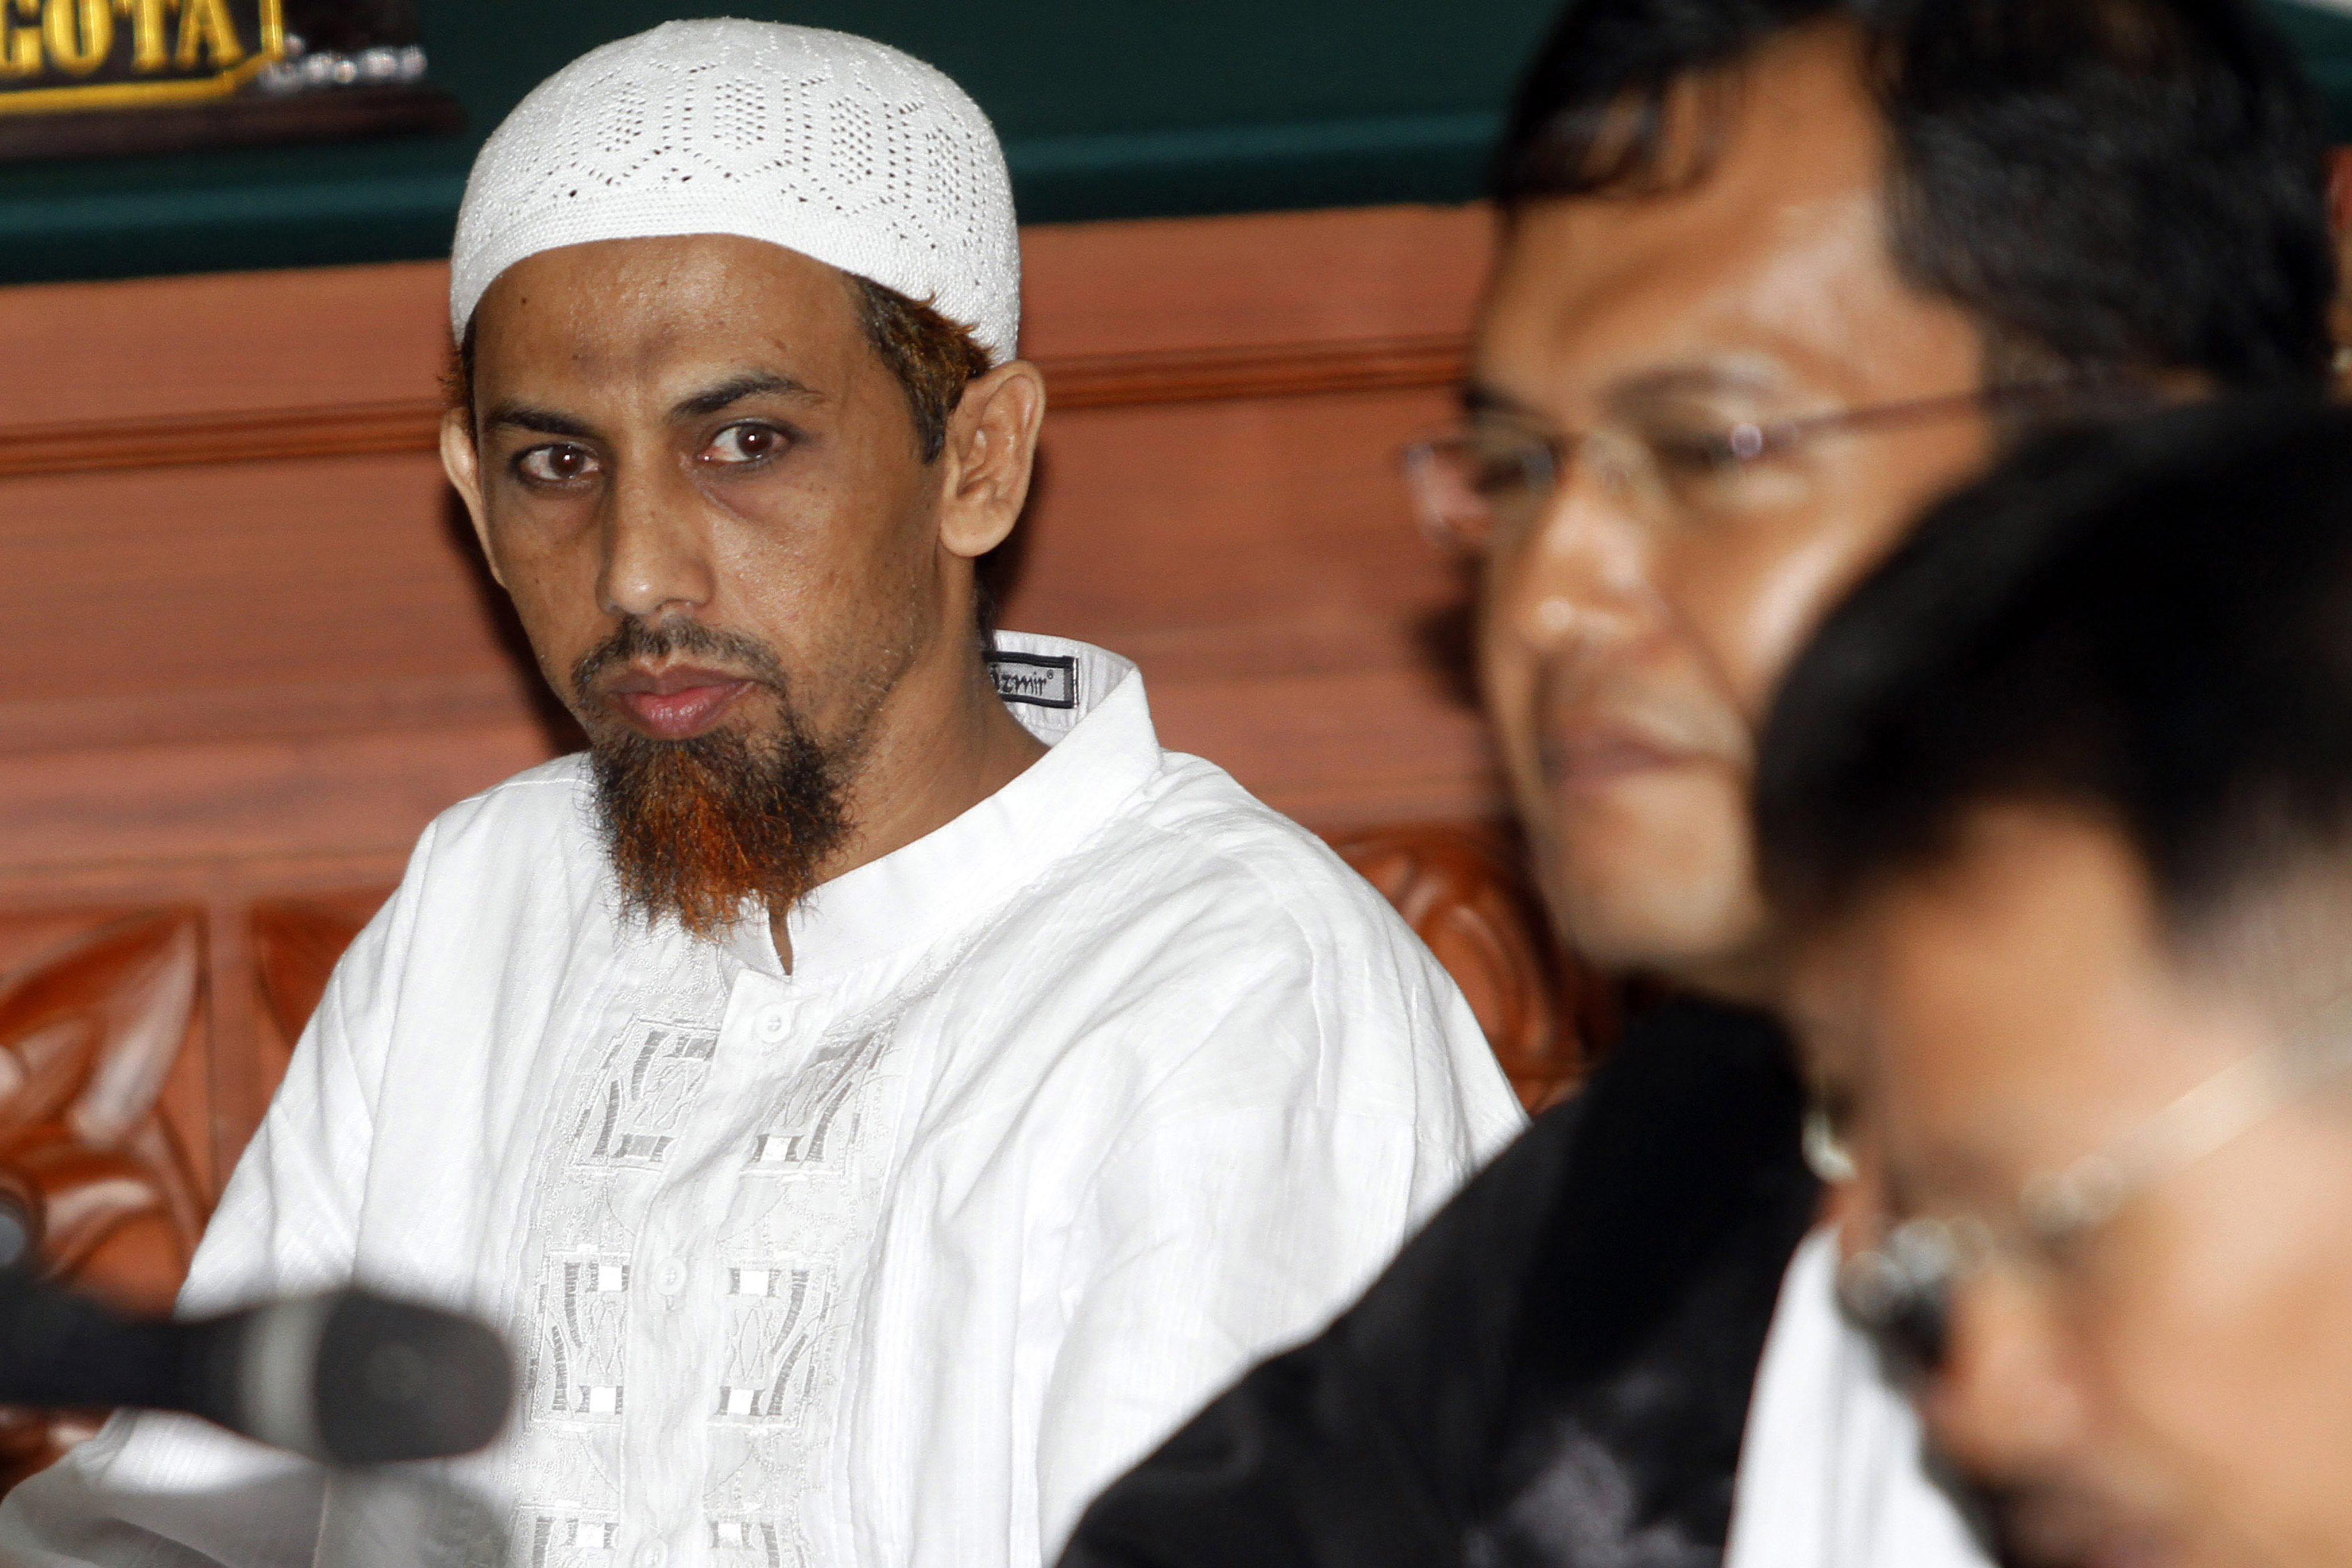 Umar Patek, an Indonesian militant charged in the 2002 Bali terrorist attacks during his trial in Jakarta, Indonesia, on March 8, 2012. Photo: AP/File